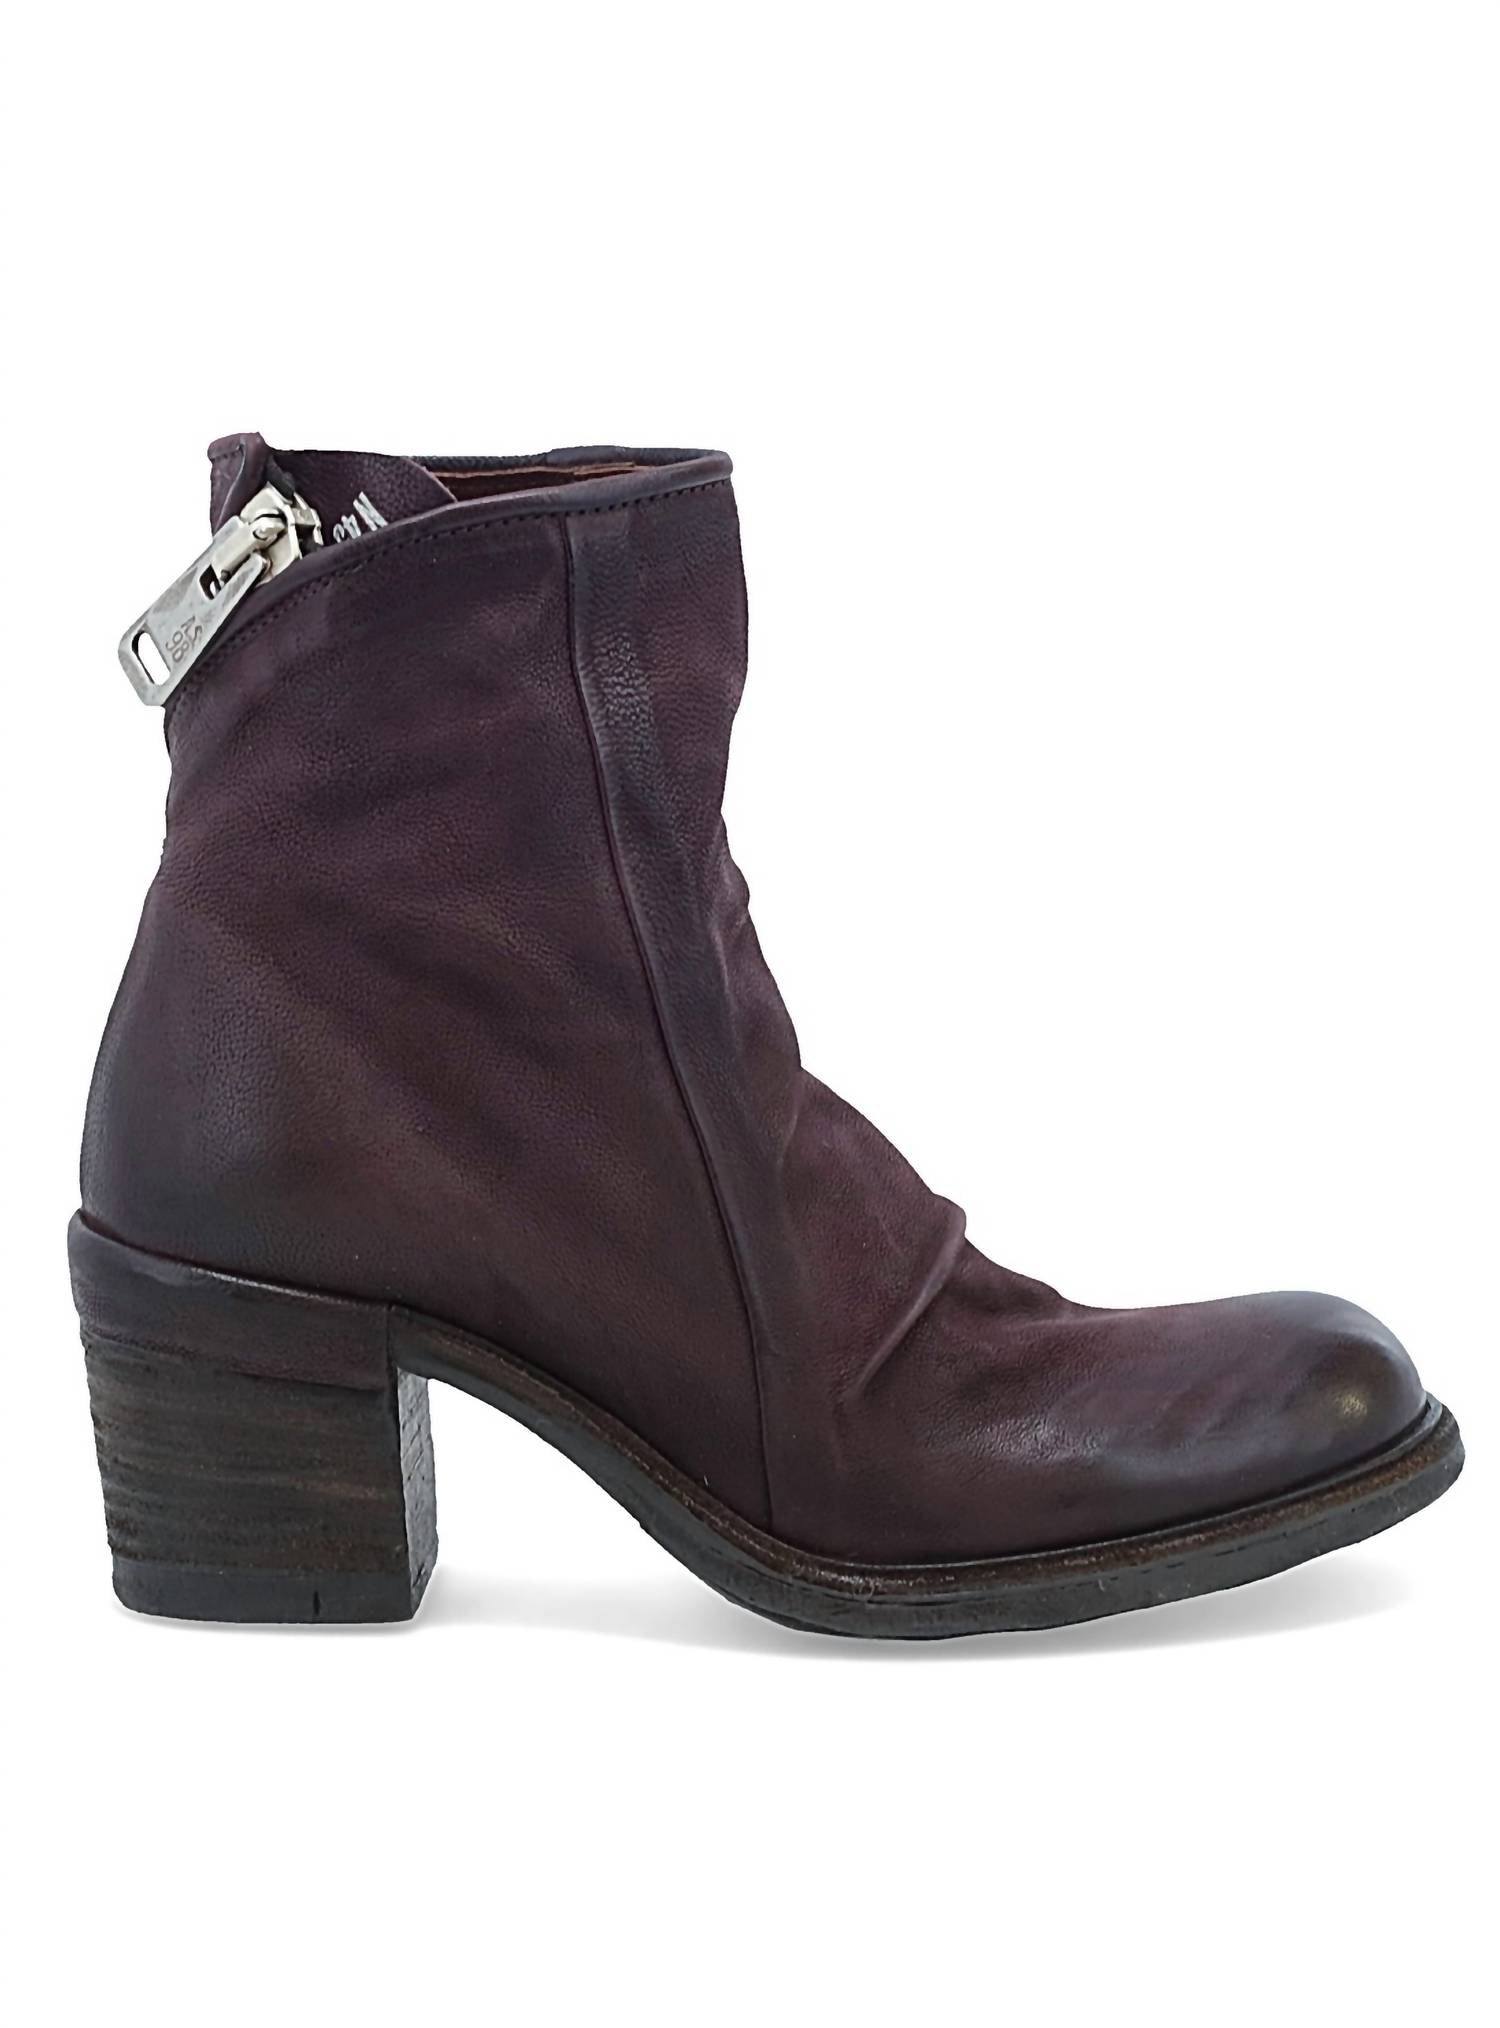 AS98 Jase Ankle Bootie in Liz